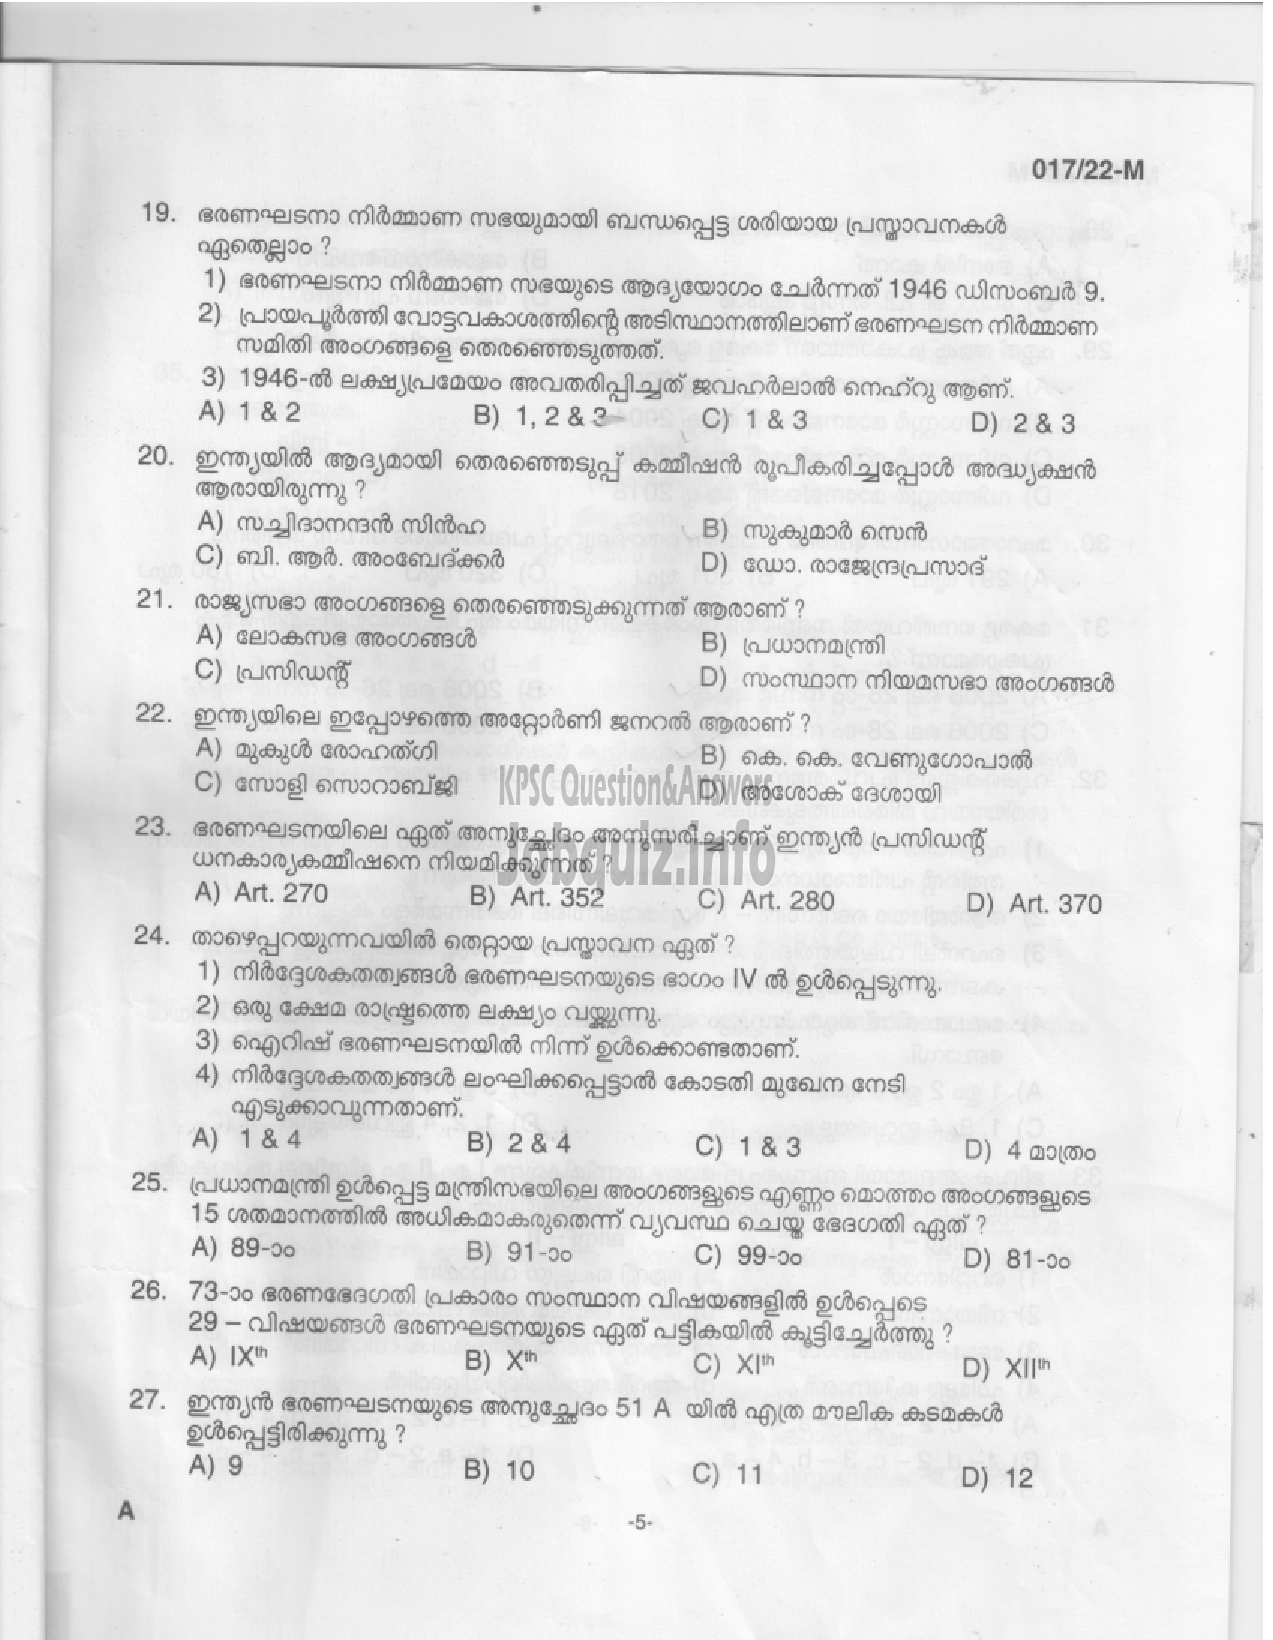 Kerala PSC Question Paper -  Police Constable, Women Police Constable, Armed Police ASI etc-POLICE DEPARTMENT  -3